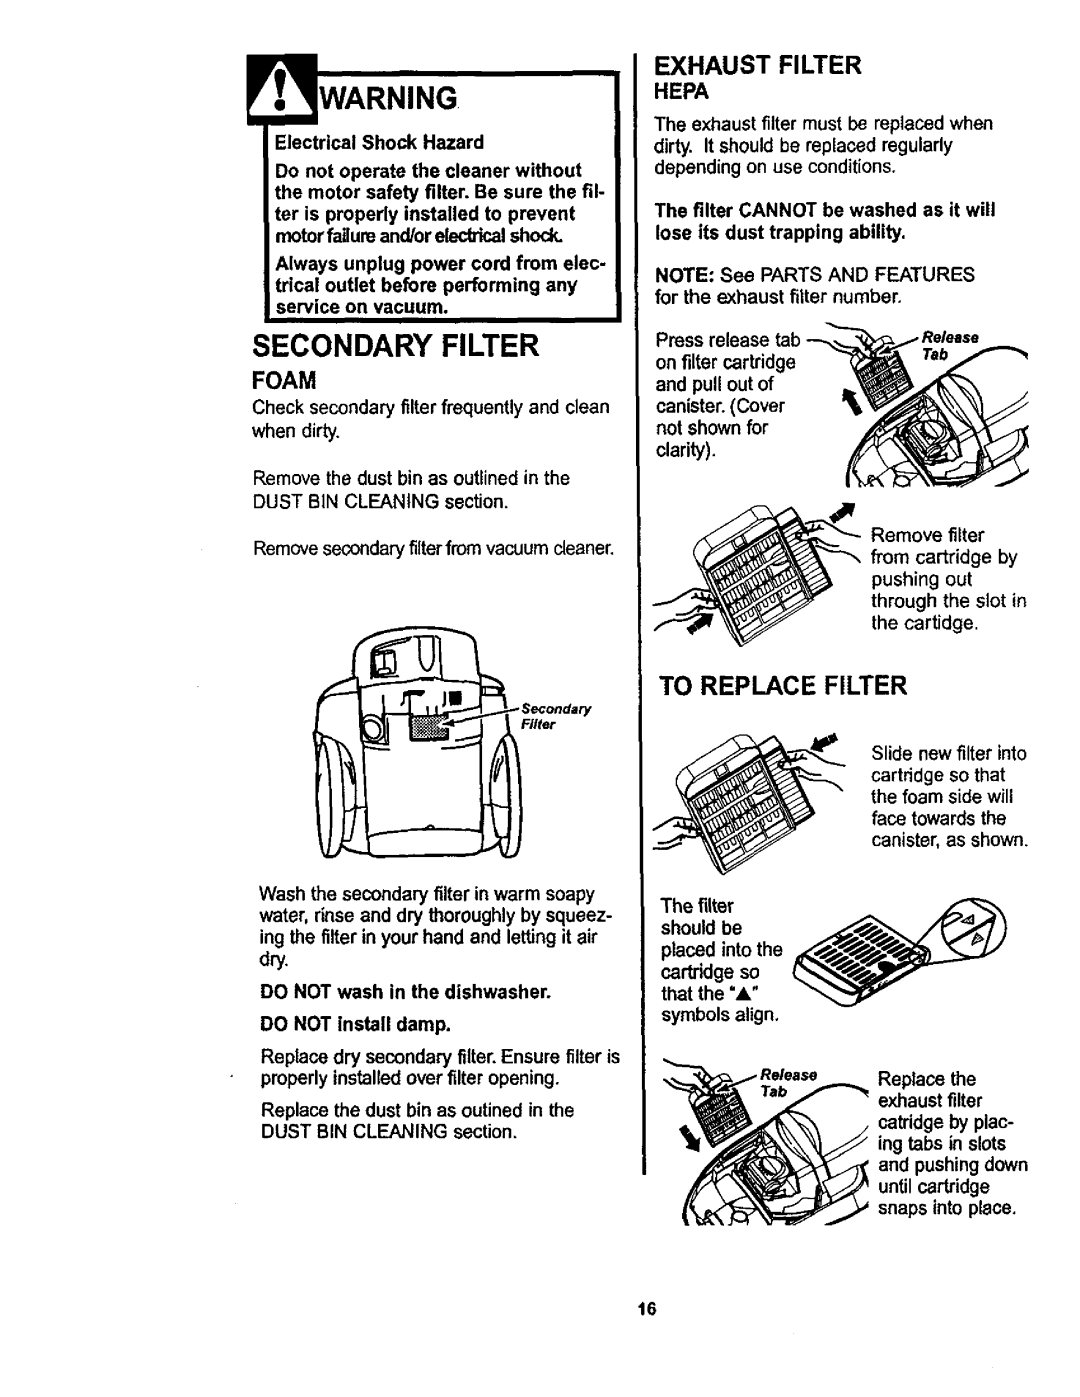 Kenmore 116.22823, 116.22822 owner manual r. WARNING, Secondary Filter, To Replace Filter, Foam, Exhaust Filter Hepa 